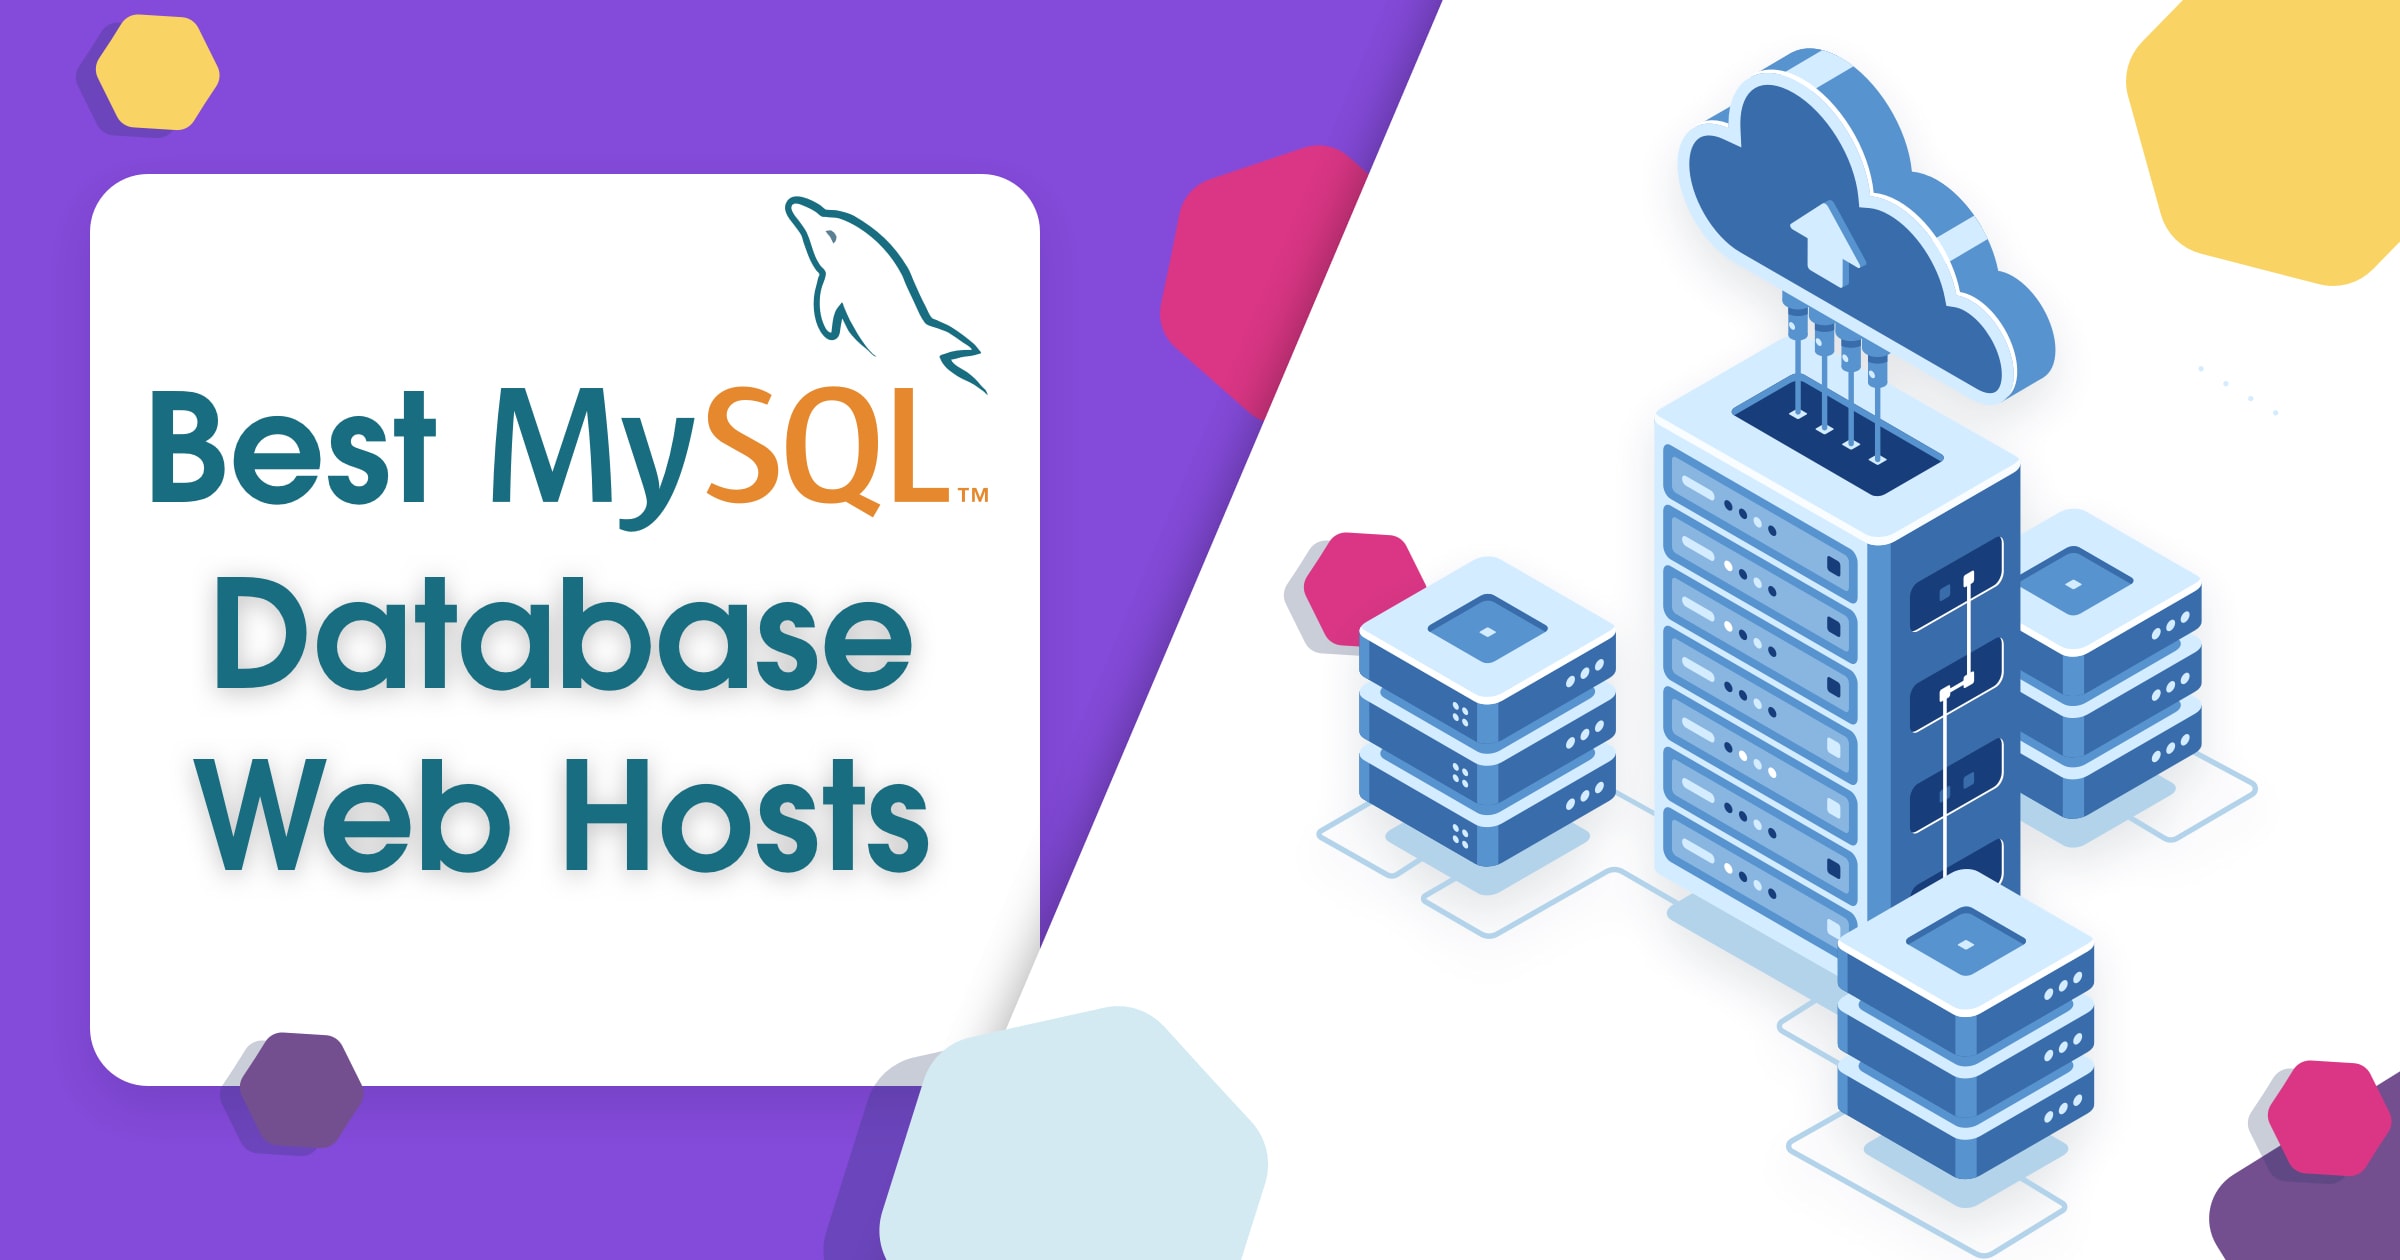 7 Best Cheap Mysql Database Hosting Services In 2020 Images, Photos, Reviews